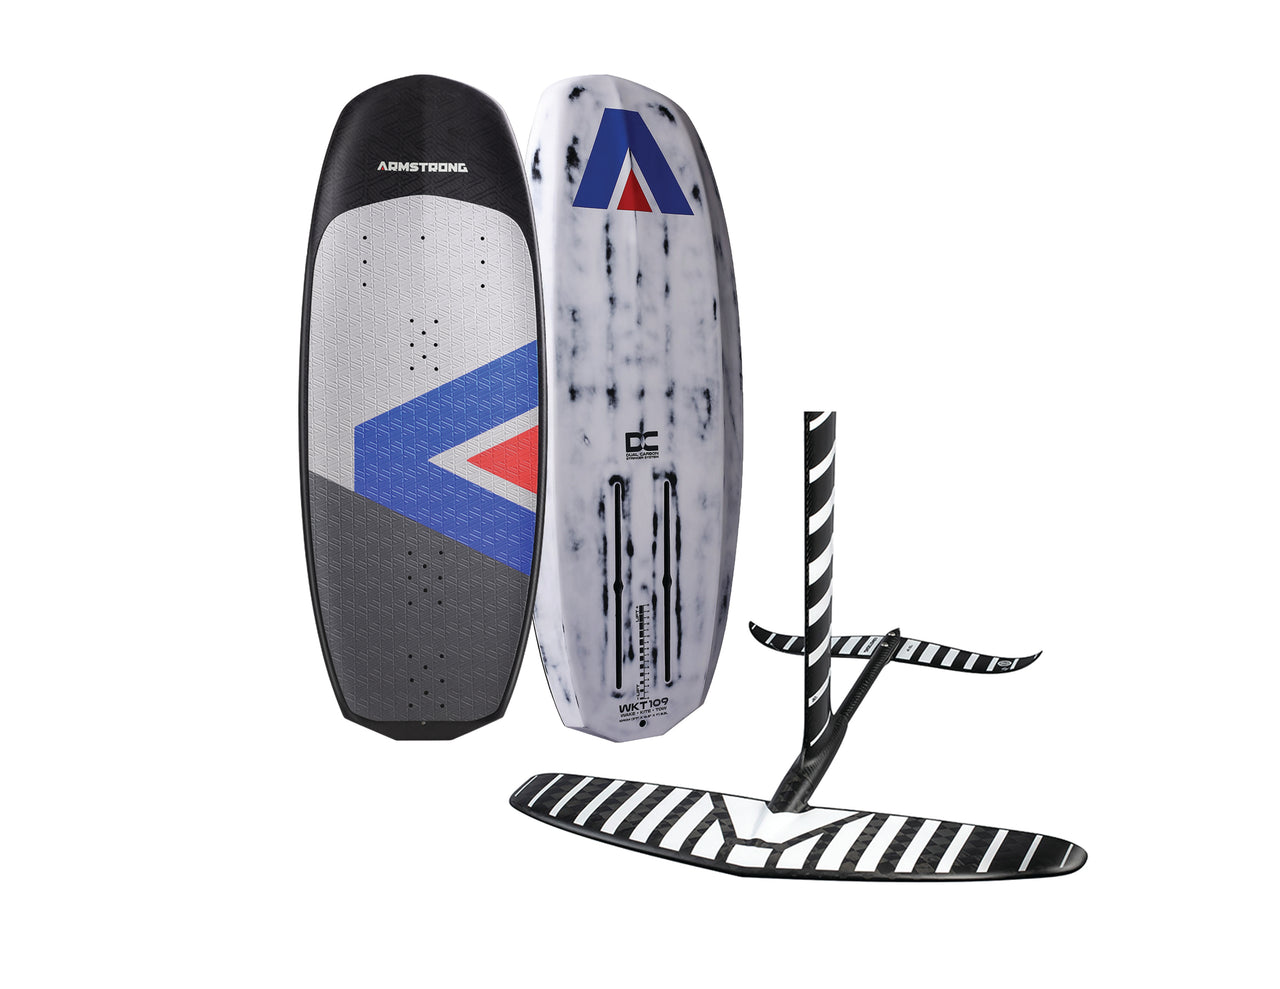 Armstrong Wakefoil Board W/ Armstrong HS1050 Foil Kit Package | 2023 | Pre-Order